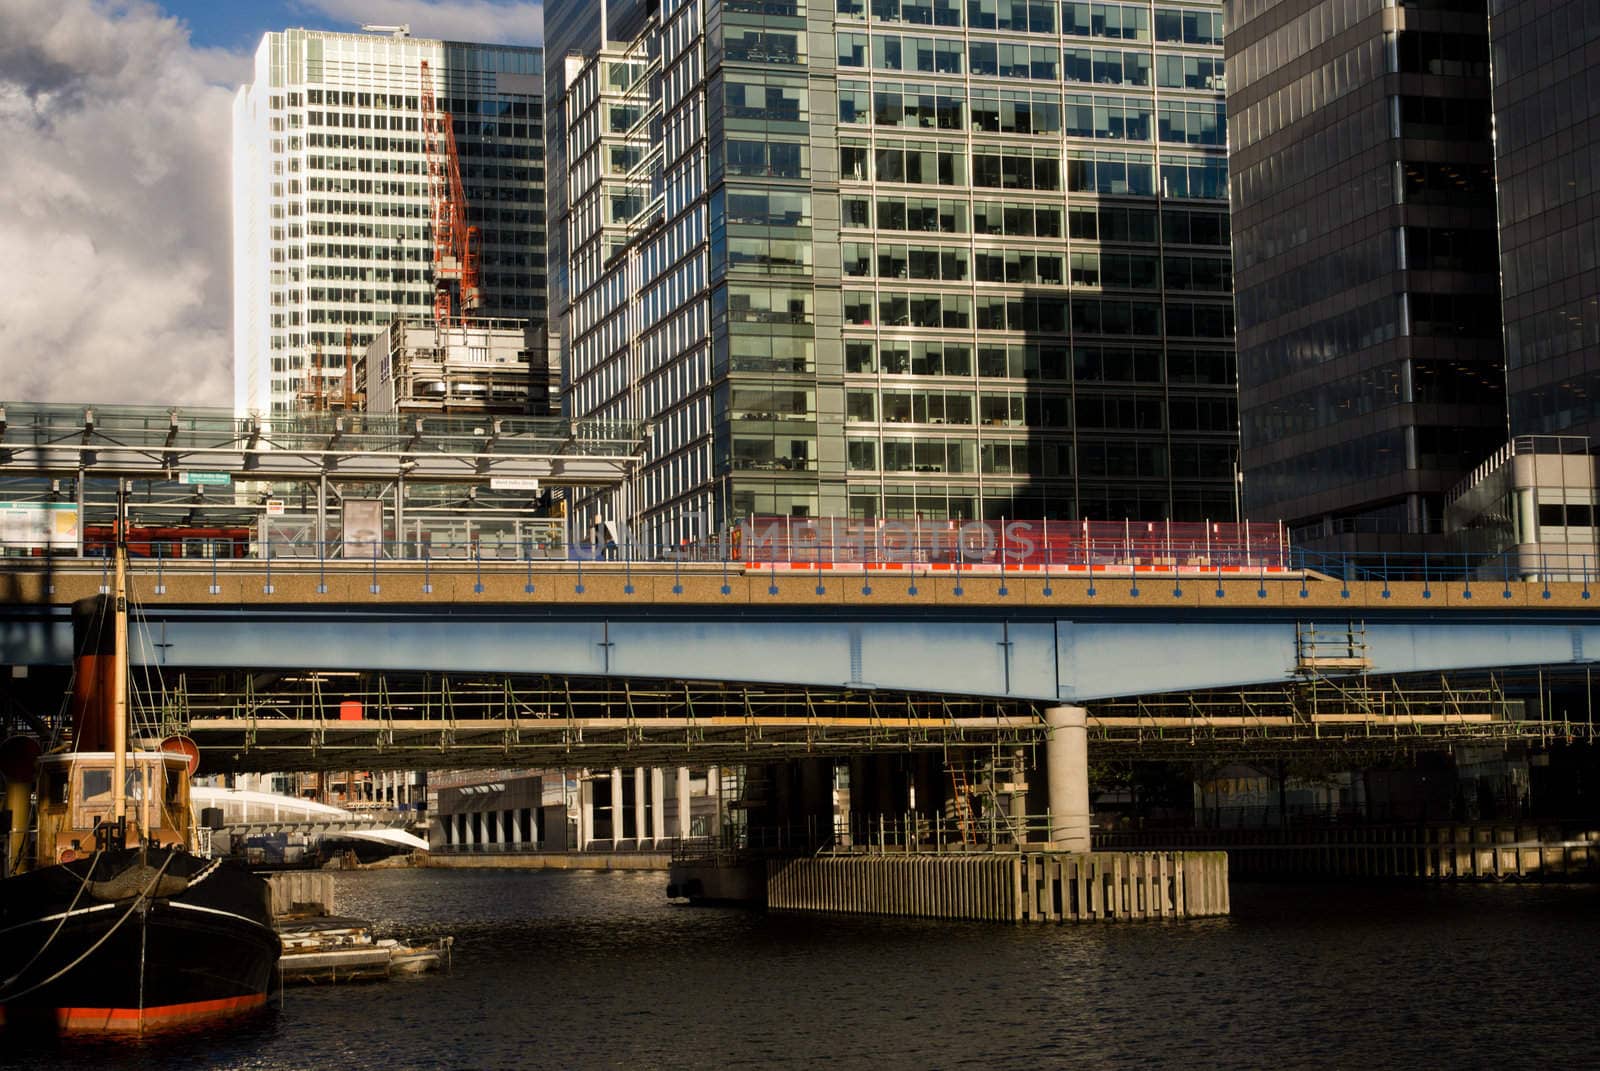 View of Canary Wharf station on the canal. London.